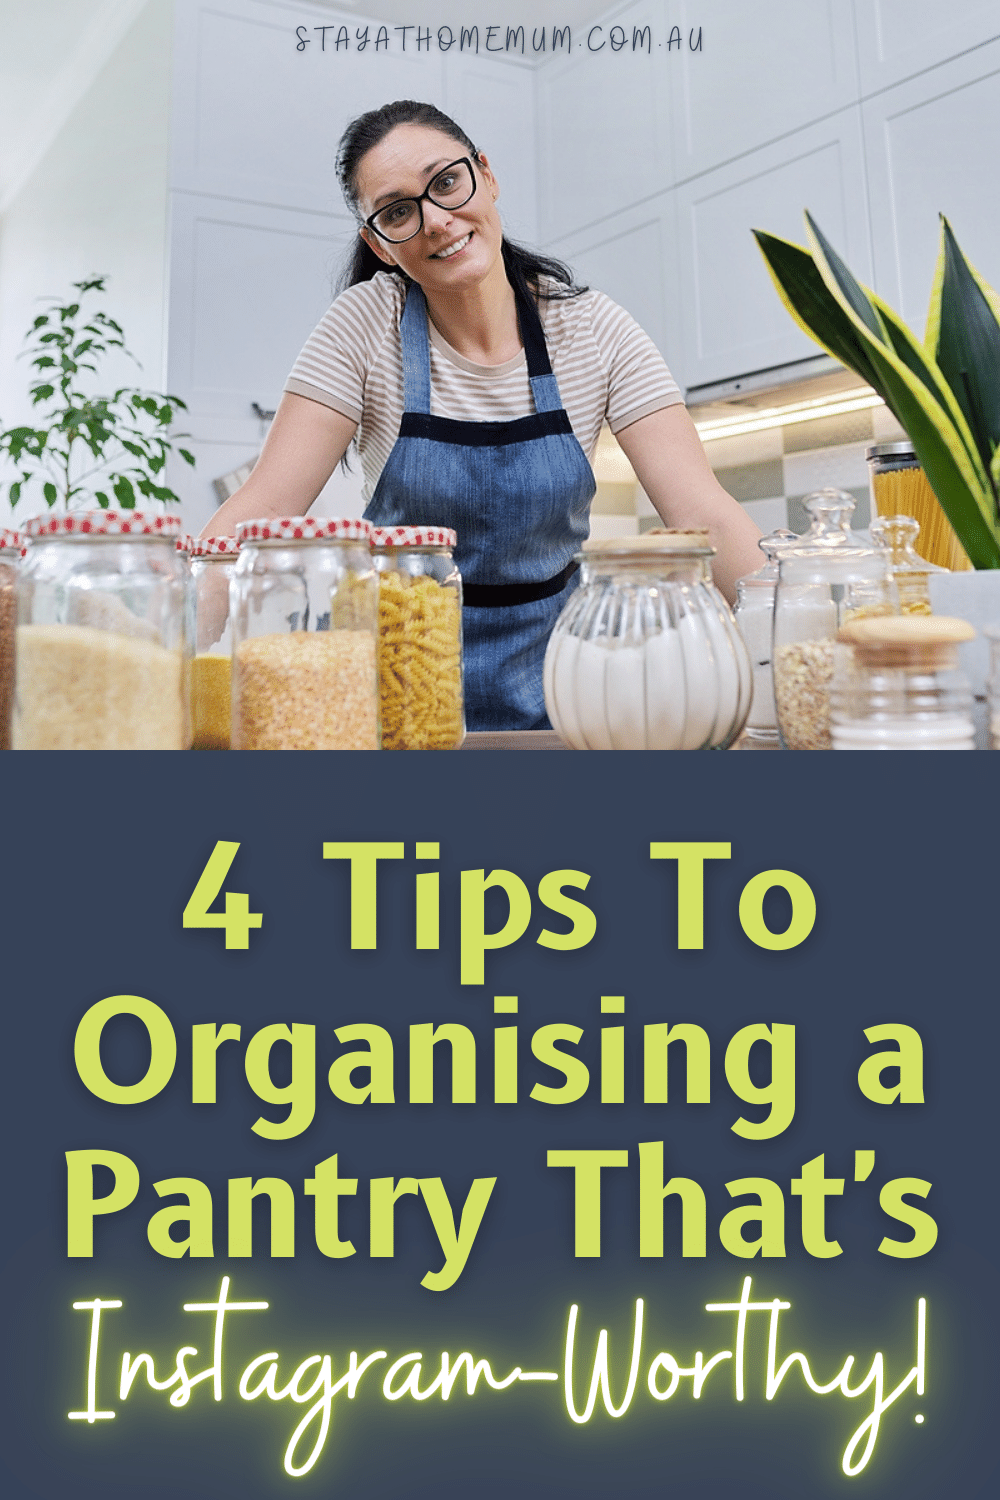 4 Tips To Organising a Pantry That's Instagram-Worthy! | Stay At Home Mum